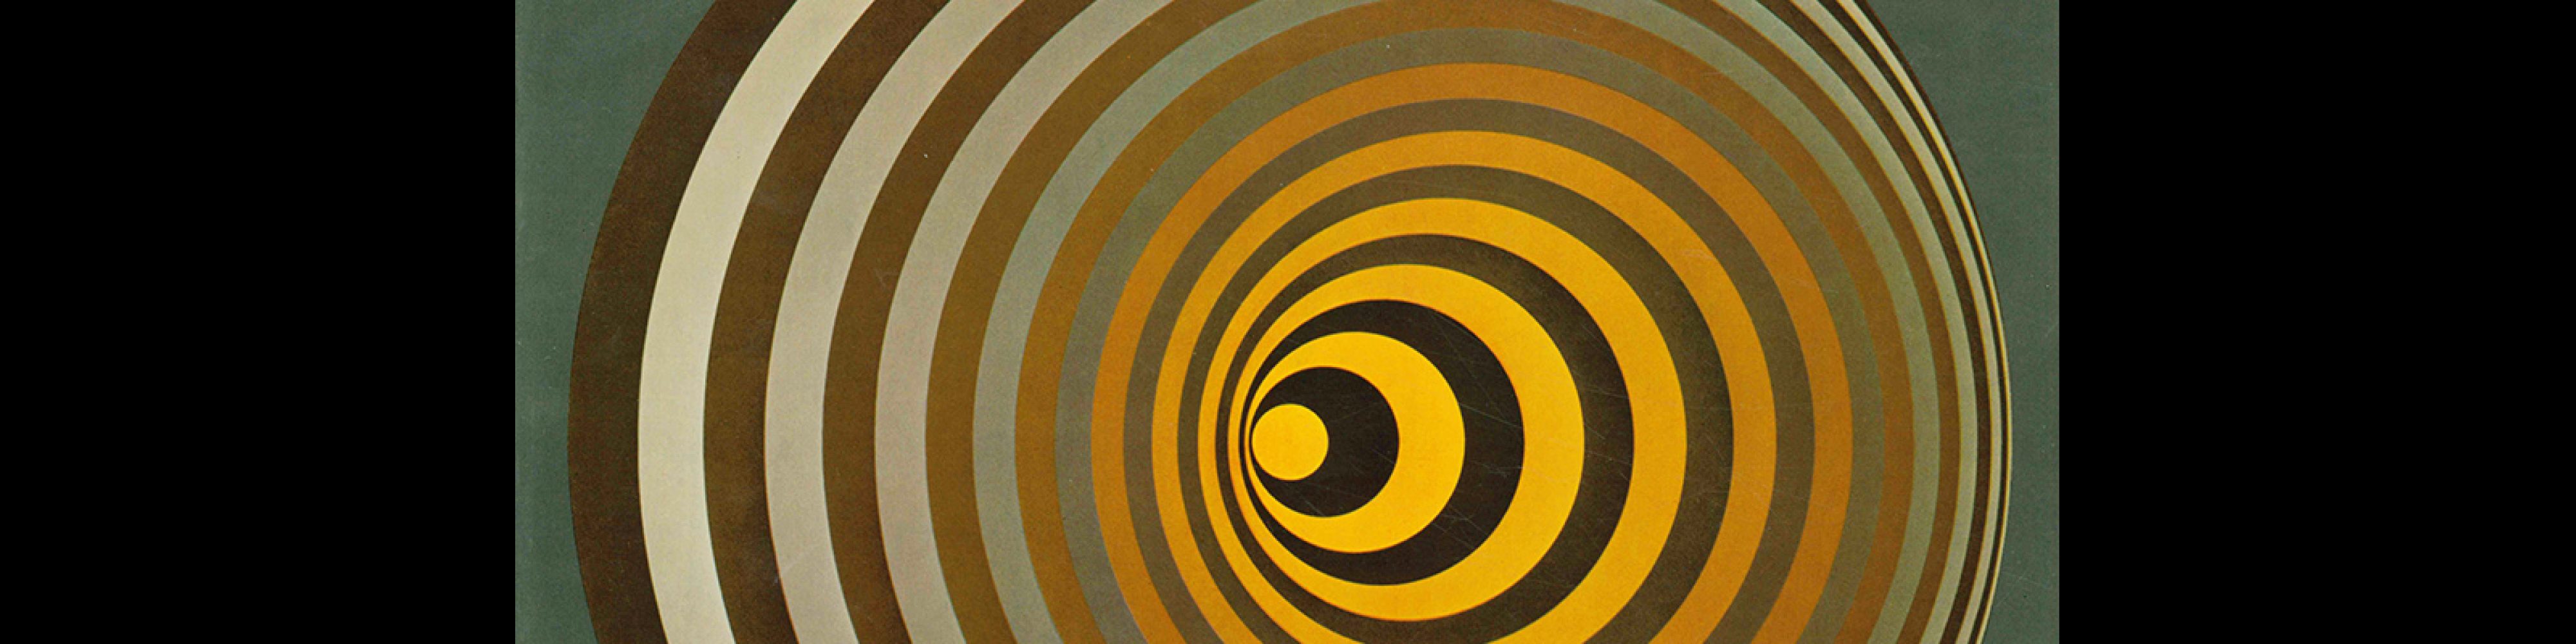 Graphis 153, 1971. Cover design by Victor Vasarely.